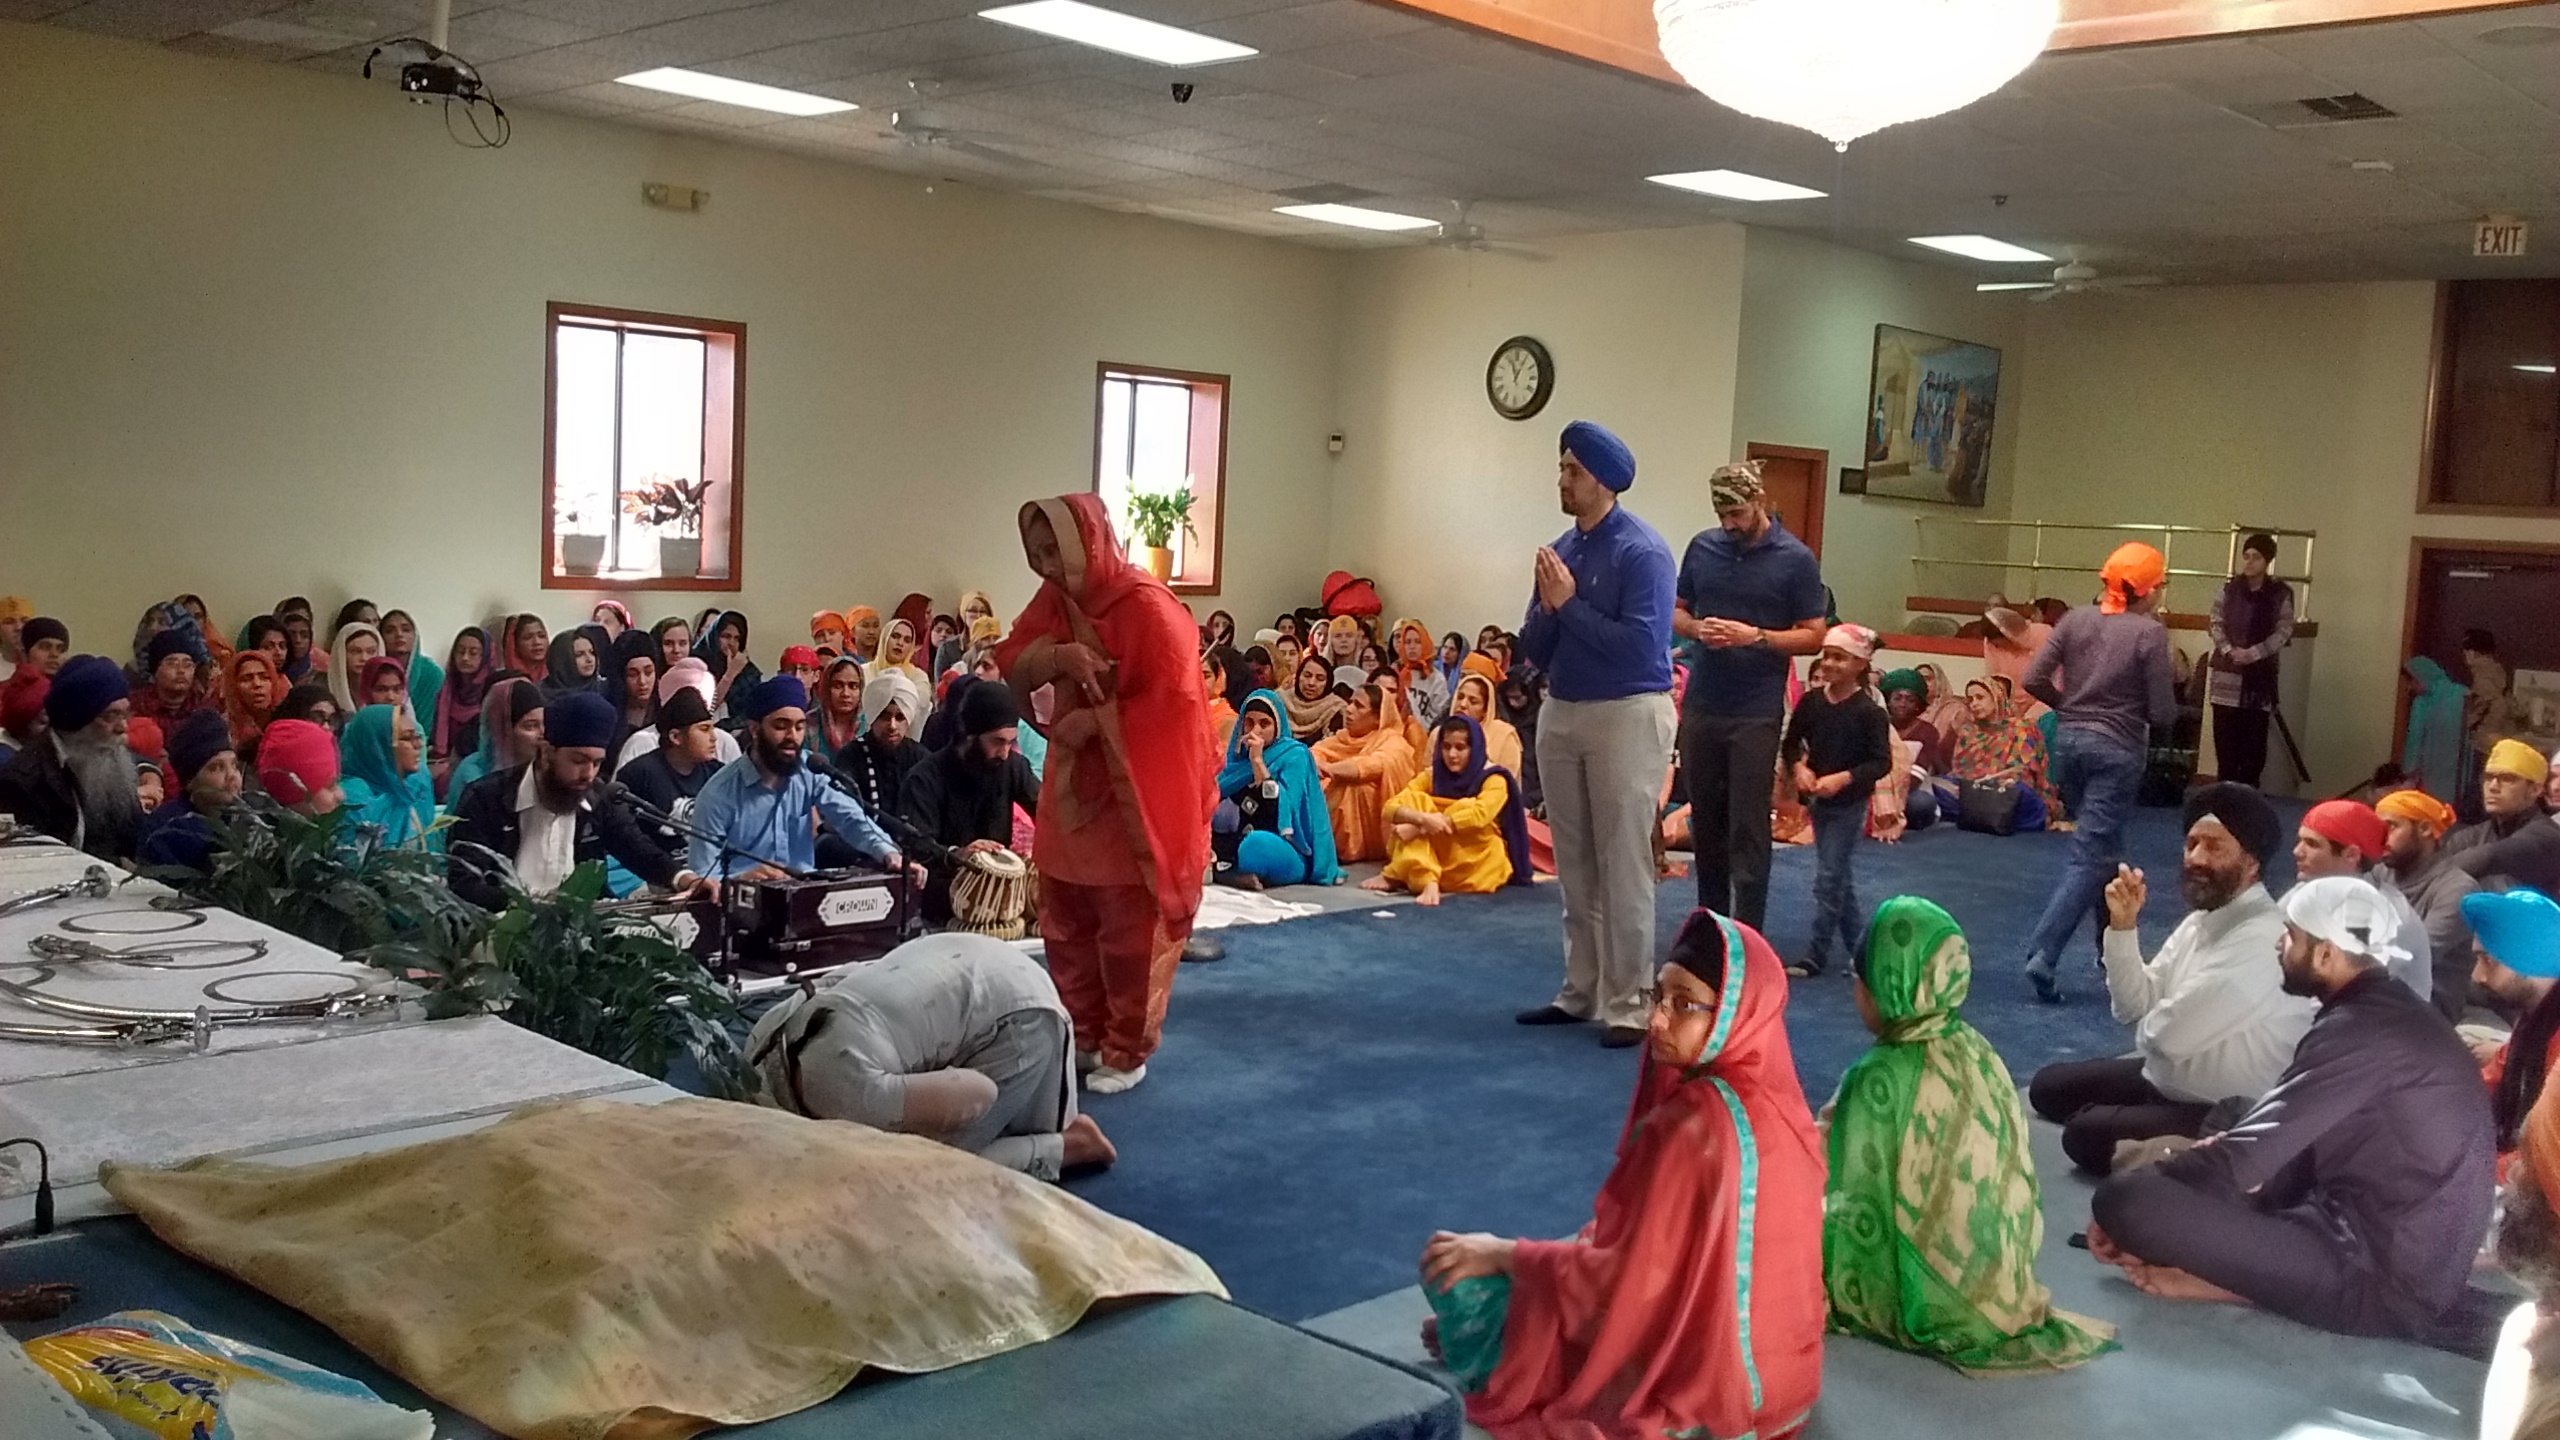  The Sikh Gurudwara in Durham was one of the stops for the Asian studies department’s annual Religions Field Trip.